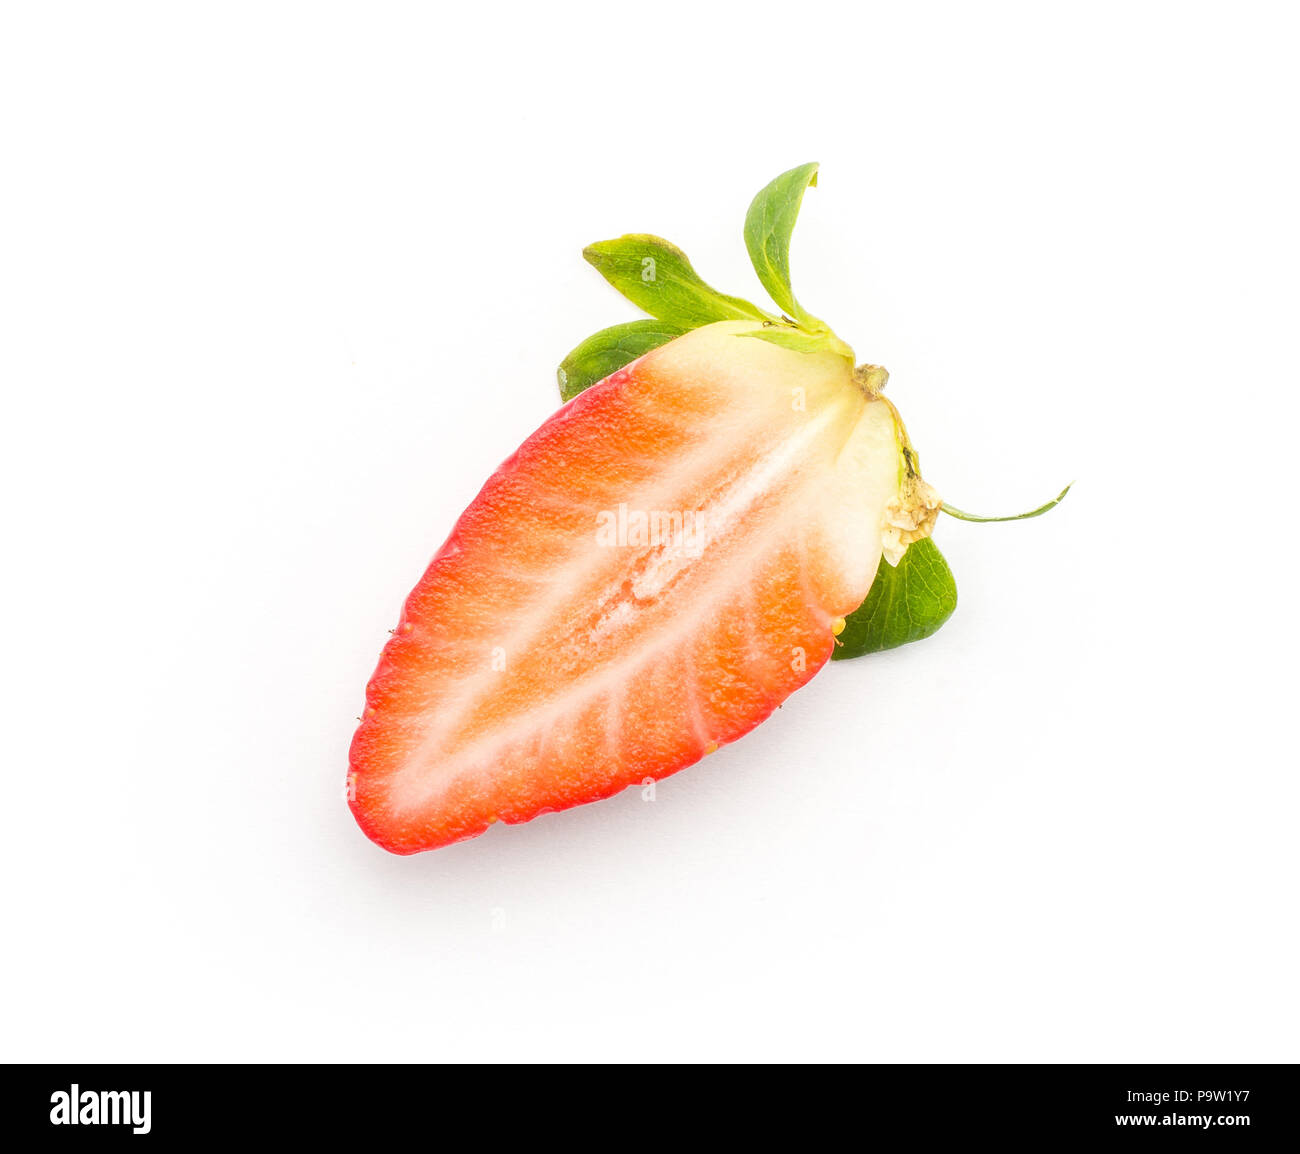 One garden strawberry cross section half top view isolated on white background fresh cut Stock Photo